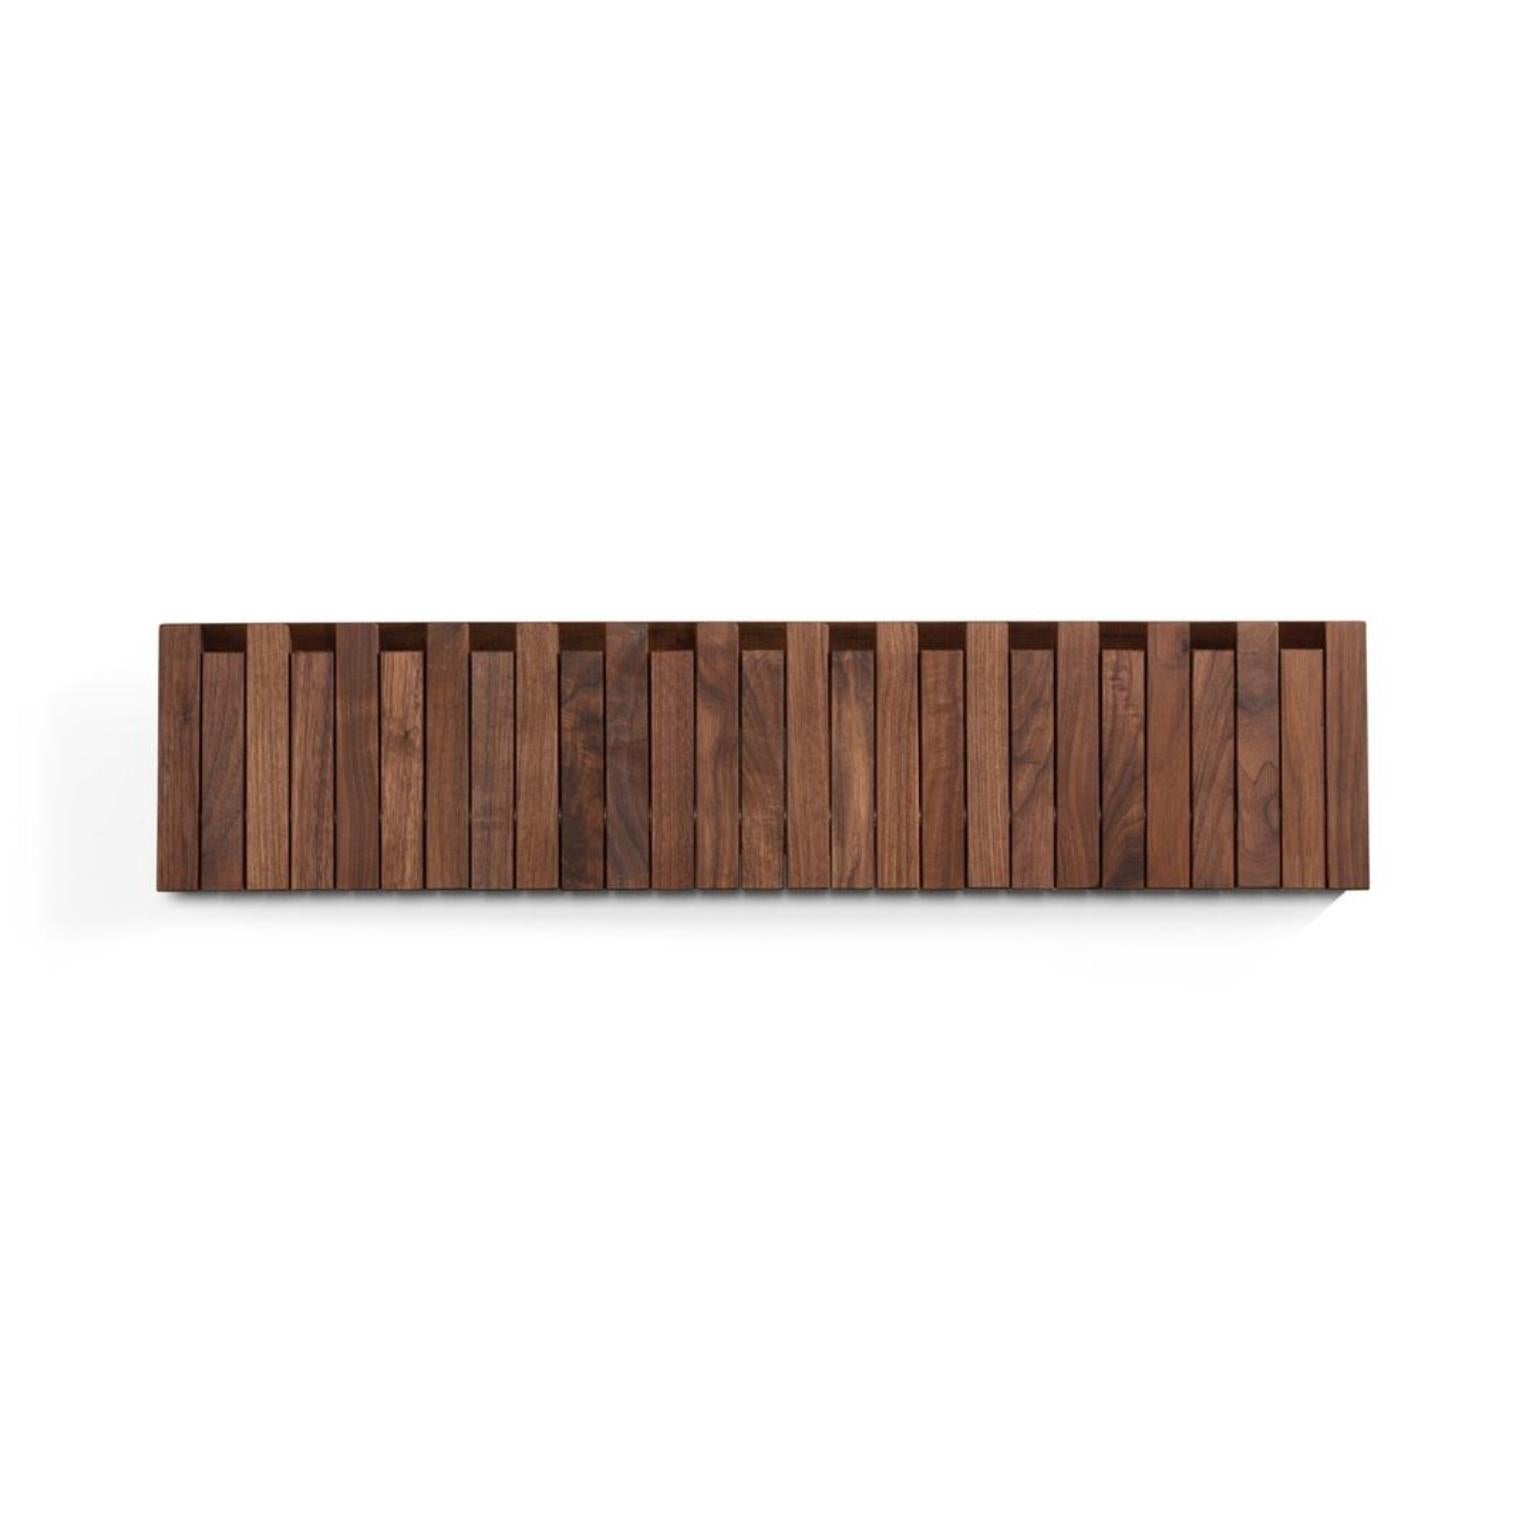 Xylo coat rack by Patrick Séha
Dimensions: 81 x H 20 cm
Materials: Walnut natural oiled

Available in various wood finishes

The XYLO is a wall-mounted coat rack with foldable hooks, inspired by the PIANO hanger panel designed by Patrick Seha